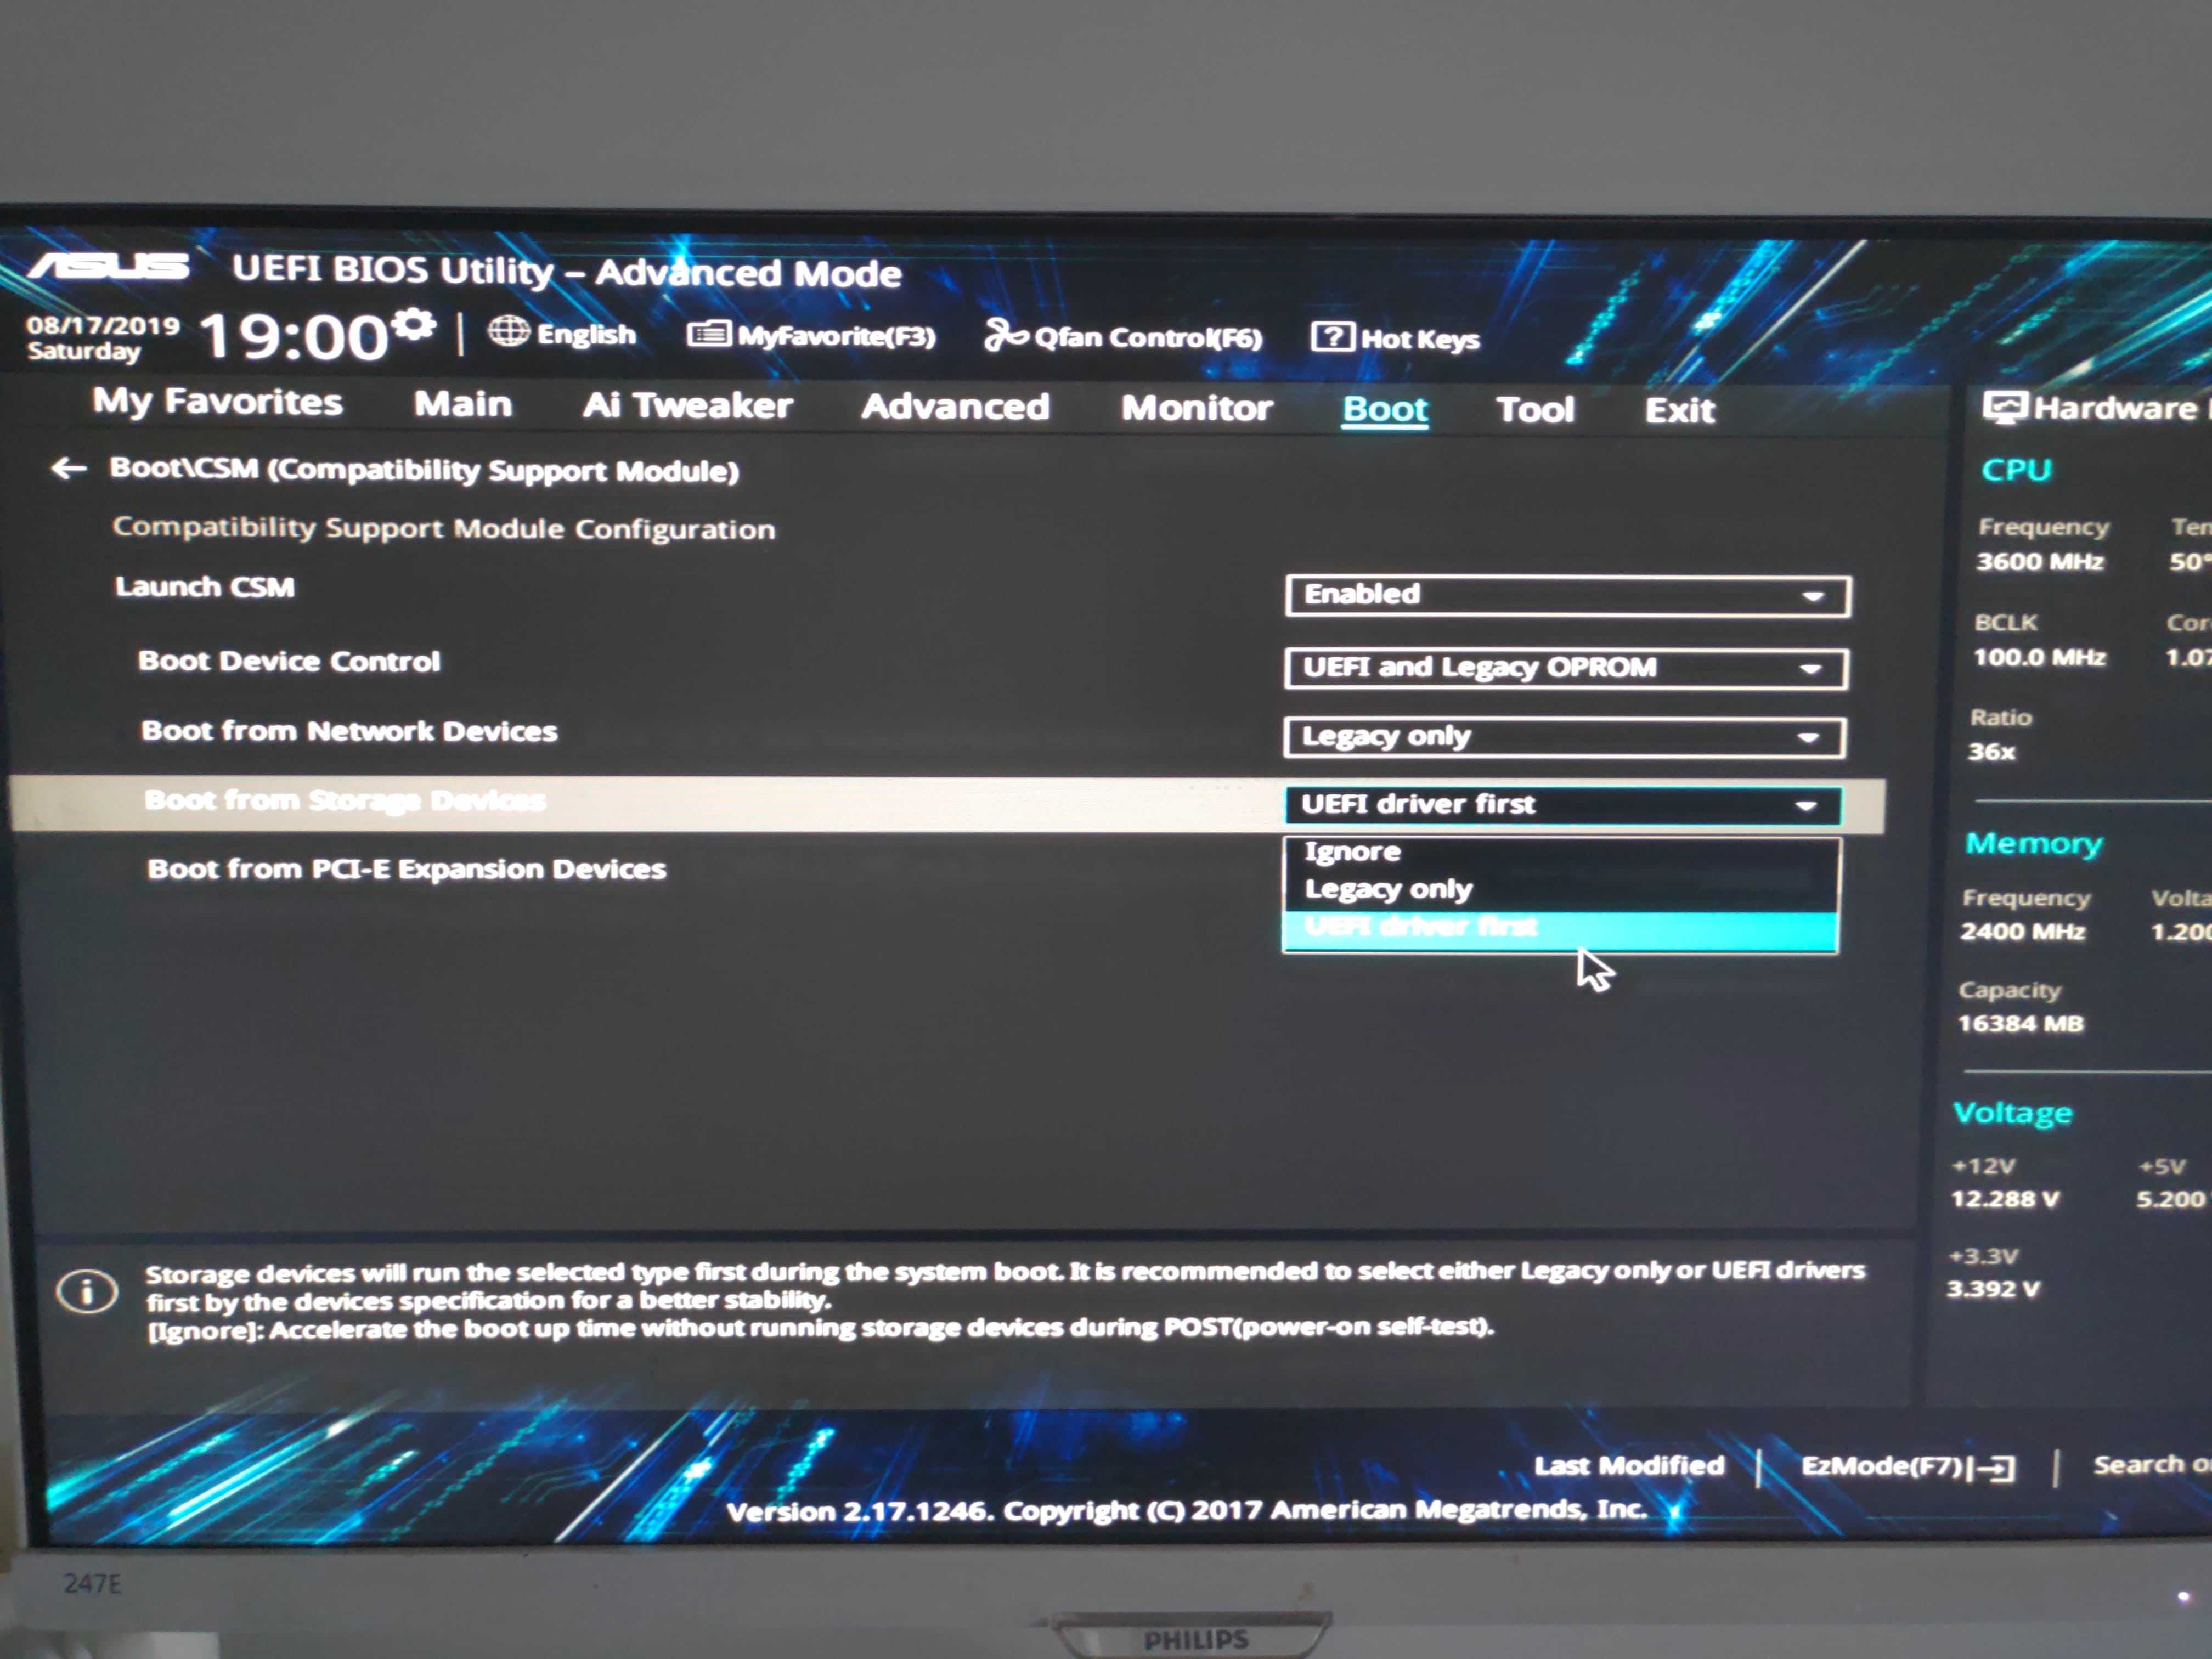 Disable legacy boot mode and enable uefi